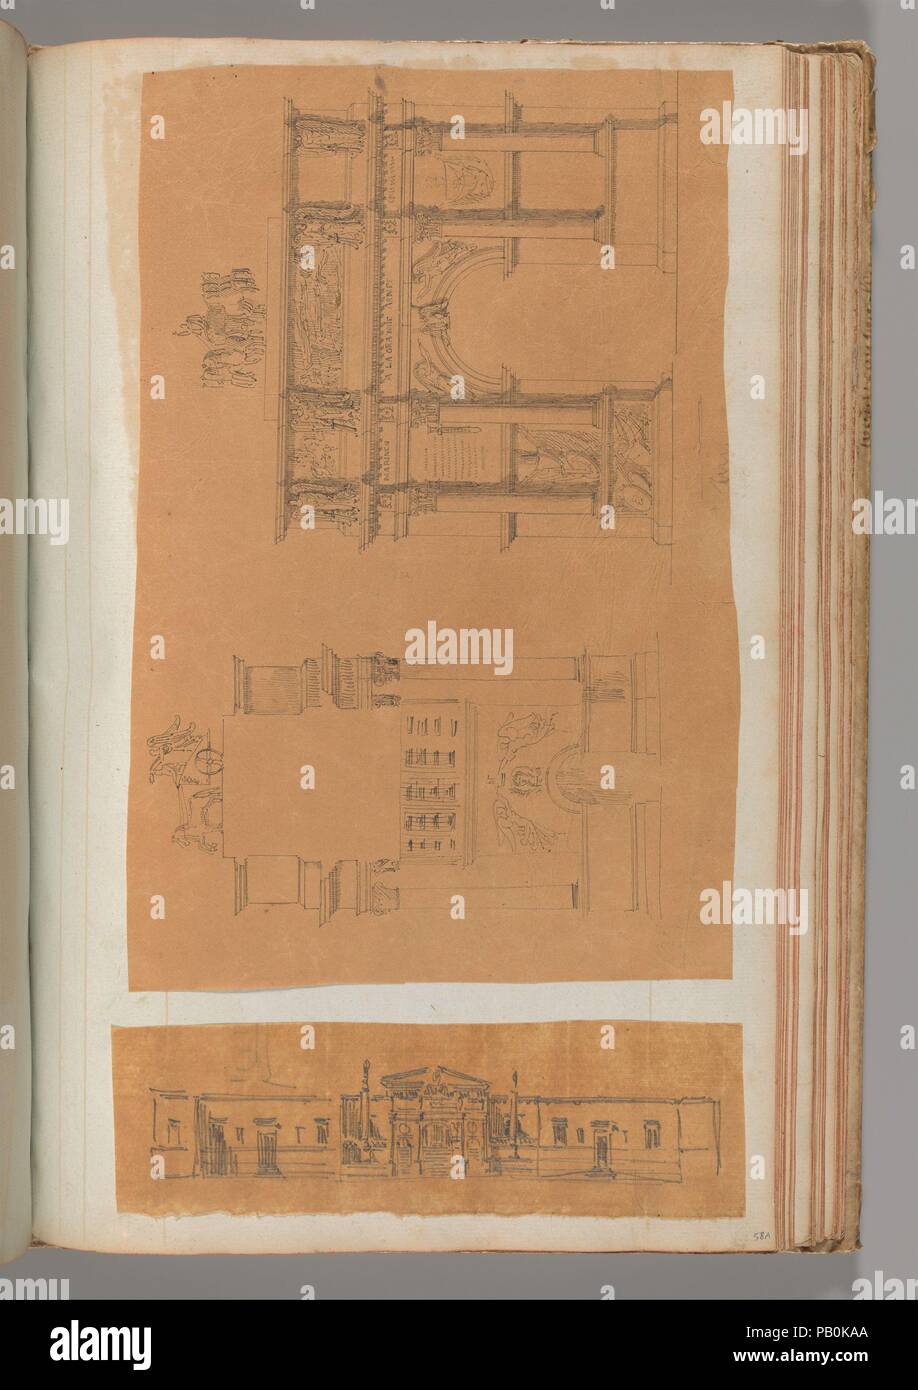 Page from a Scrapbook containing Drawings and Several Prints of Architecture, Interiors, Furniture and Other Objects. Artist: Workshop of Charles Percier (French, Paris 1764-1838 Paris); Workshop of Pierre François Léonard Fontaine (French, Pontoise 1762-1853 Paris). Dimensions: 15 11/16 x 10 in.  (39.8 x 25.4 cm). Date: ca. 1800-1850. Museum: Metropolitan Museum of Art, New York, USA. Stock Photo